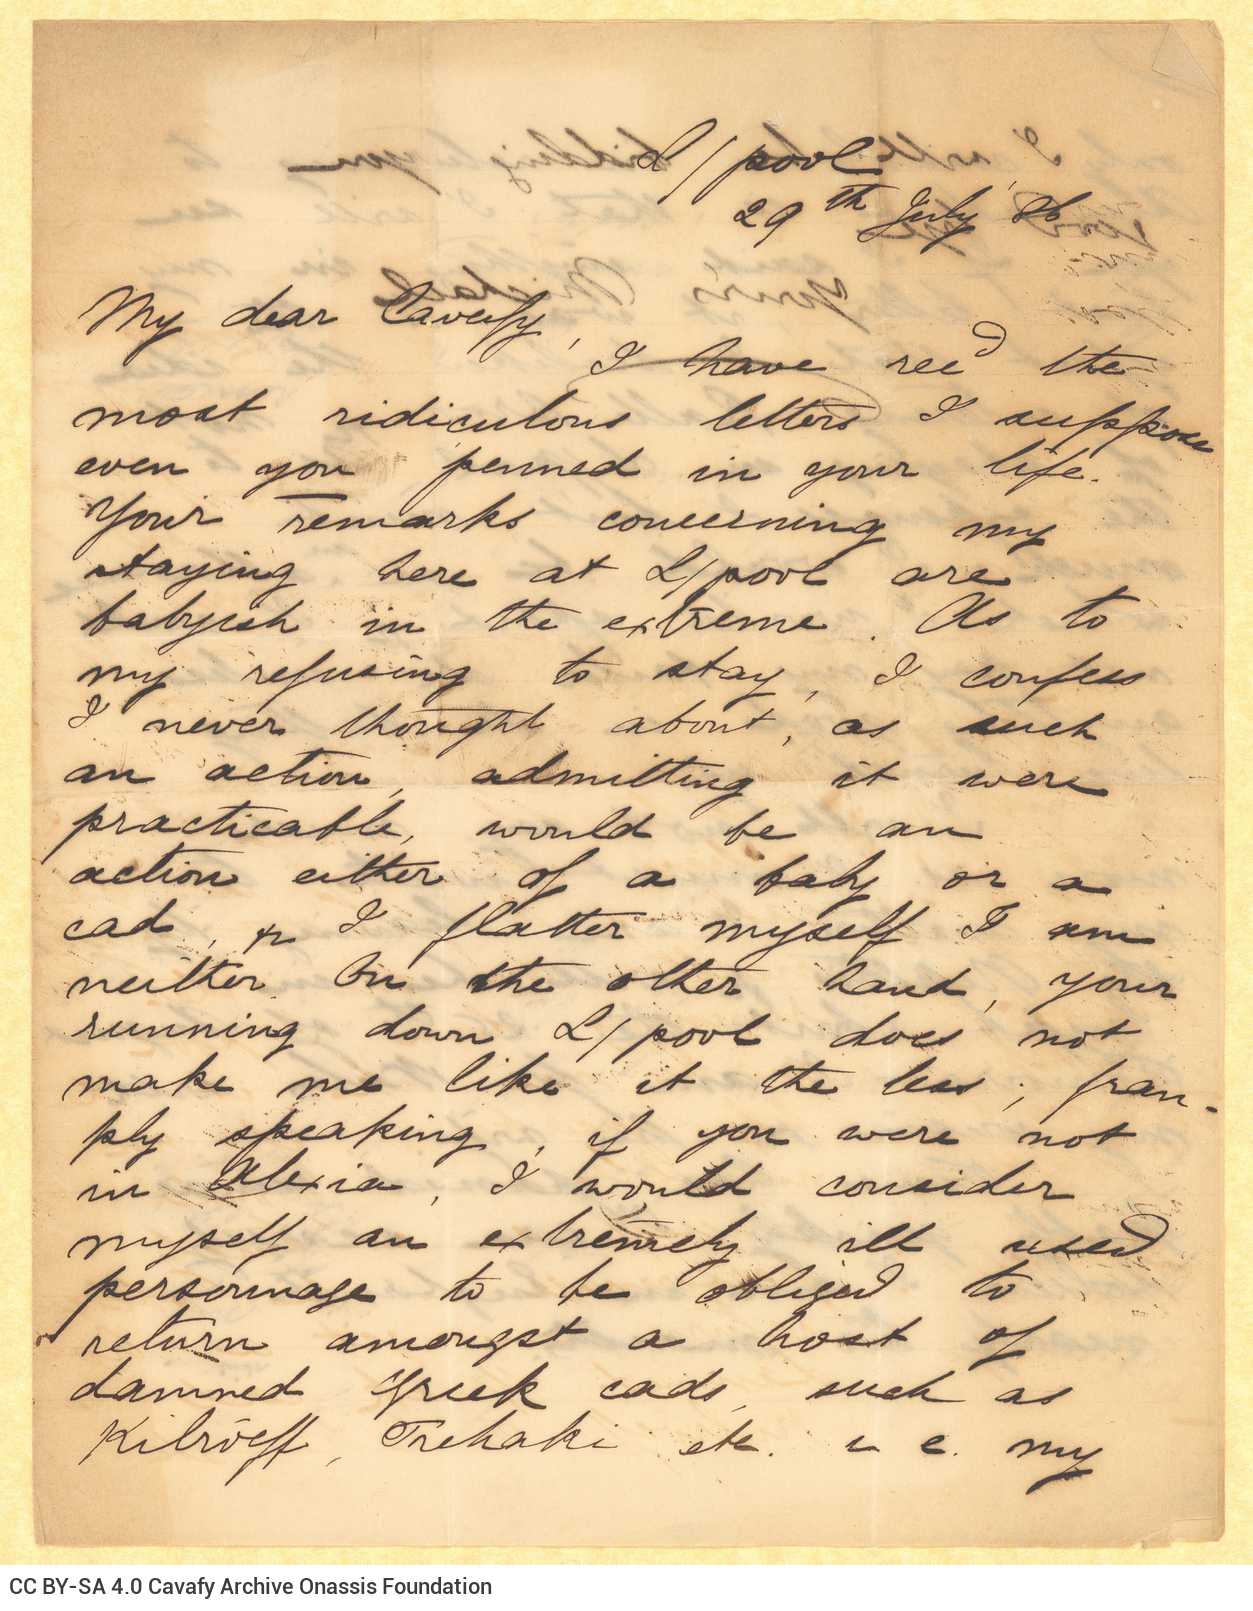 Handwritten letter by Mike Ralli to Cavafy in a bifolio, with notes on all sides except for the recto of the second sheet. It